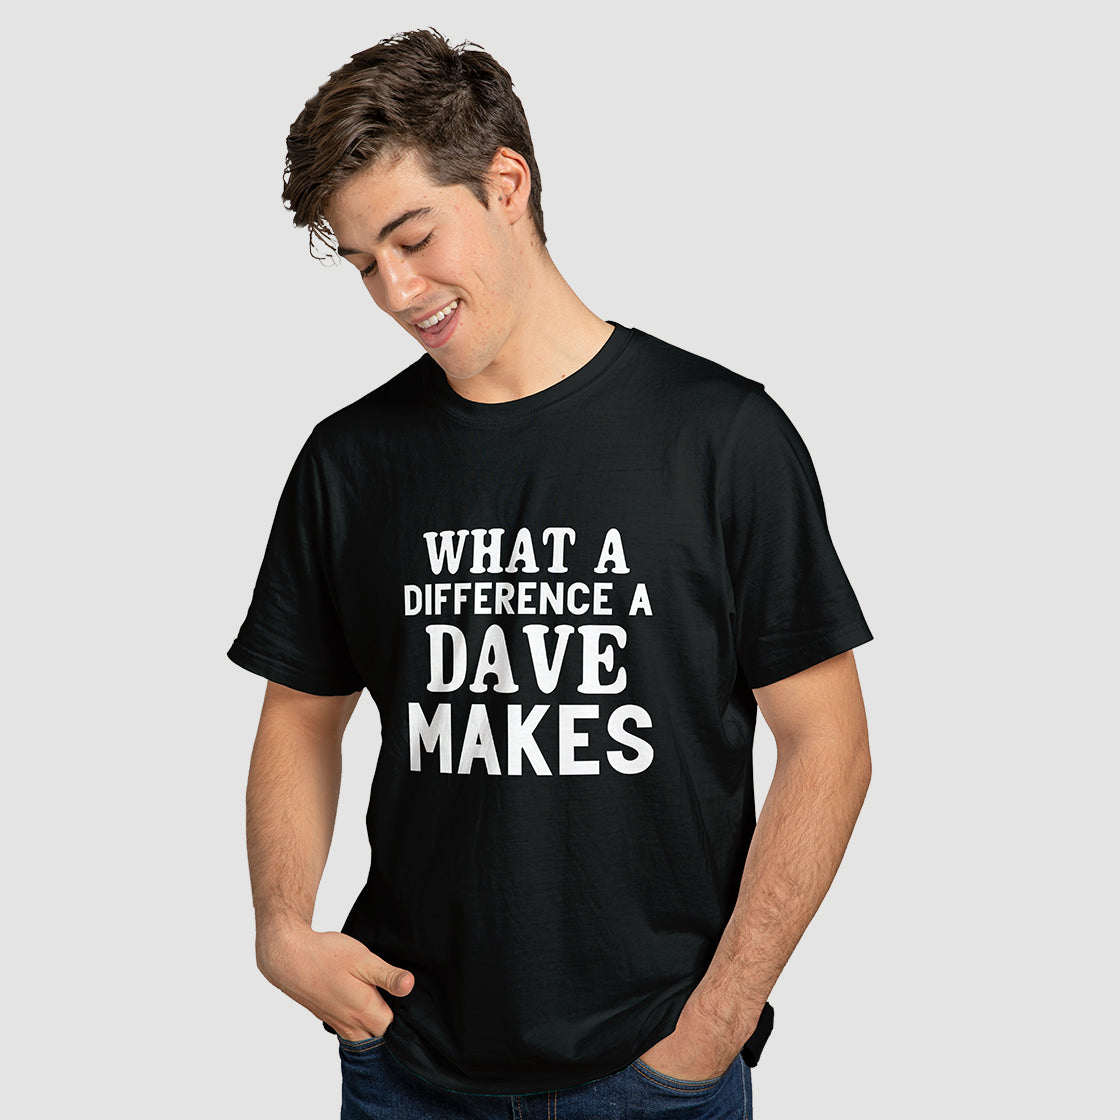 "What a Difference a Dave Makes" T-Shirt